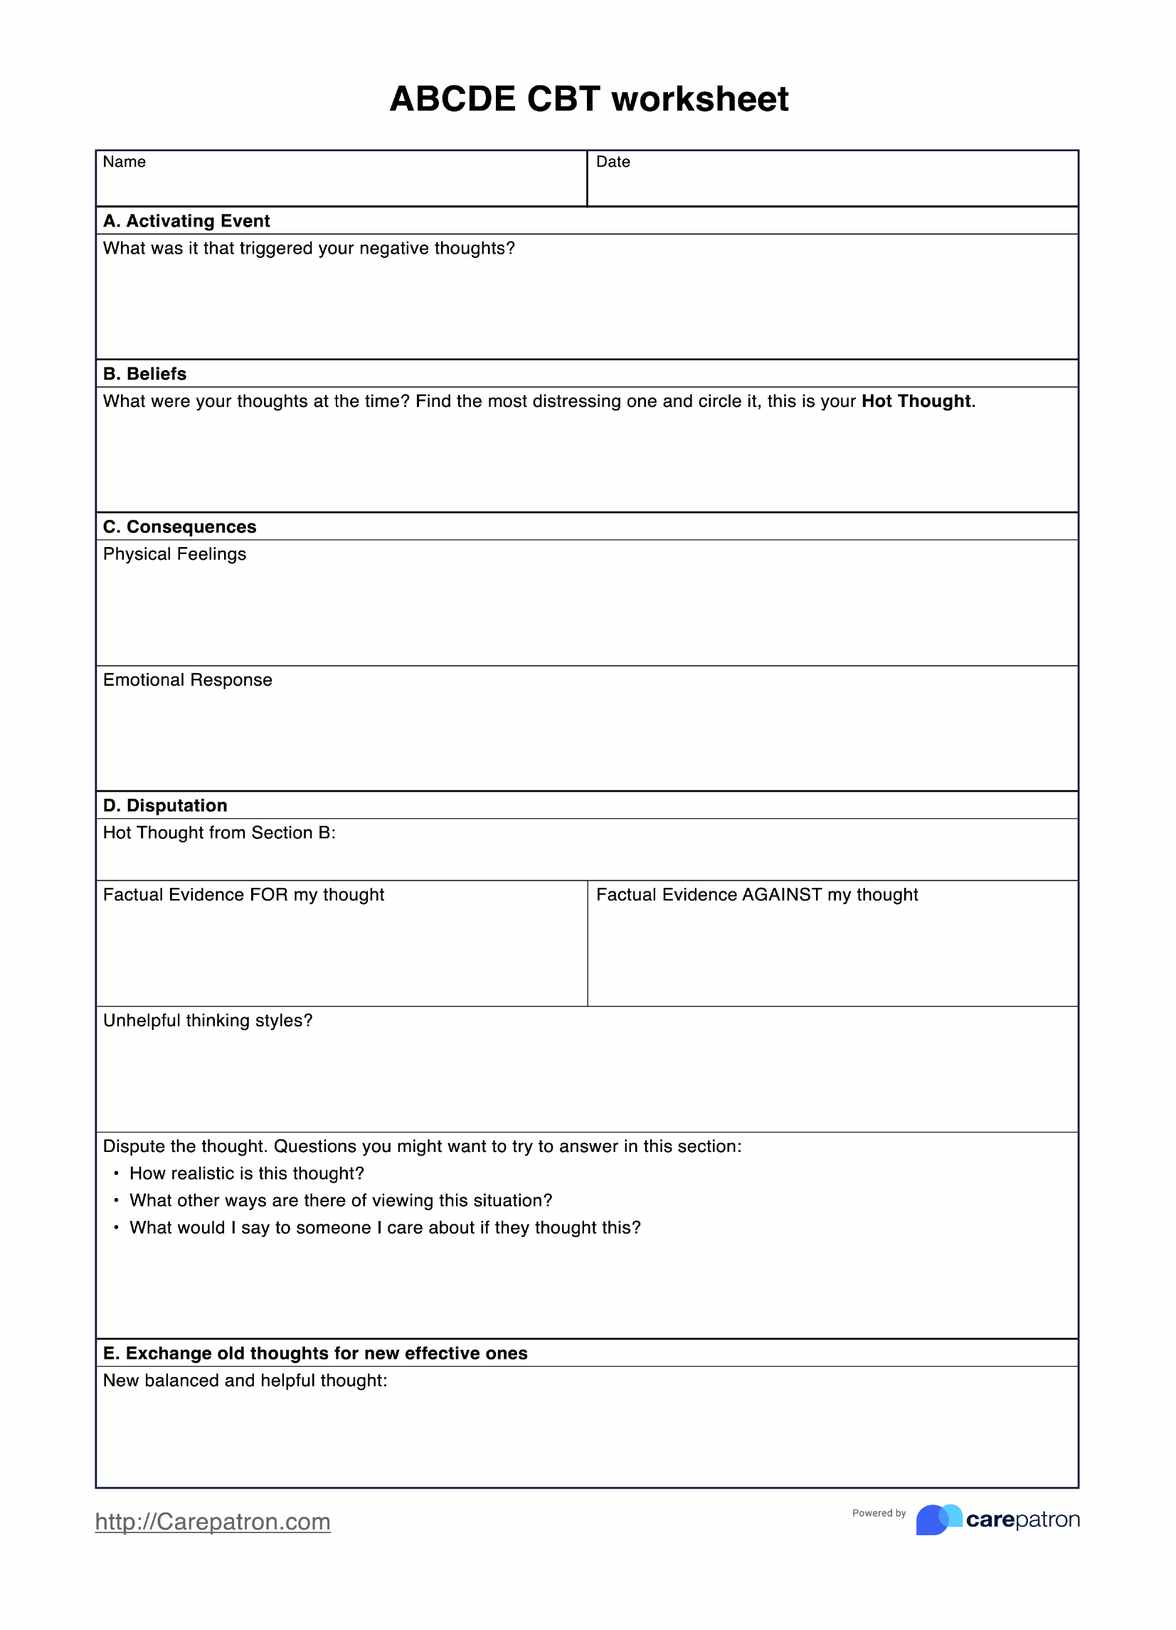 ABCDE CBT Worksheets PDF Example